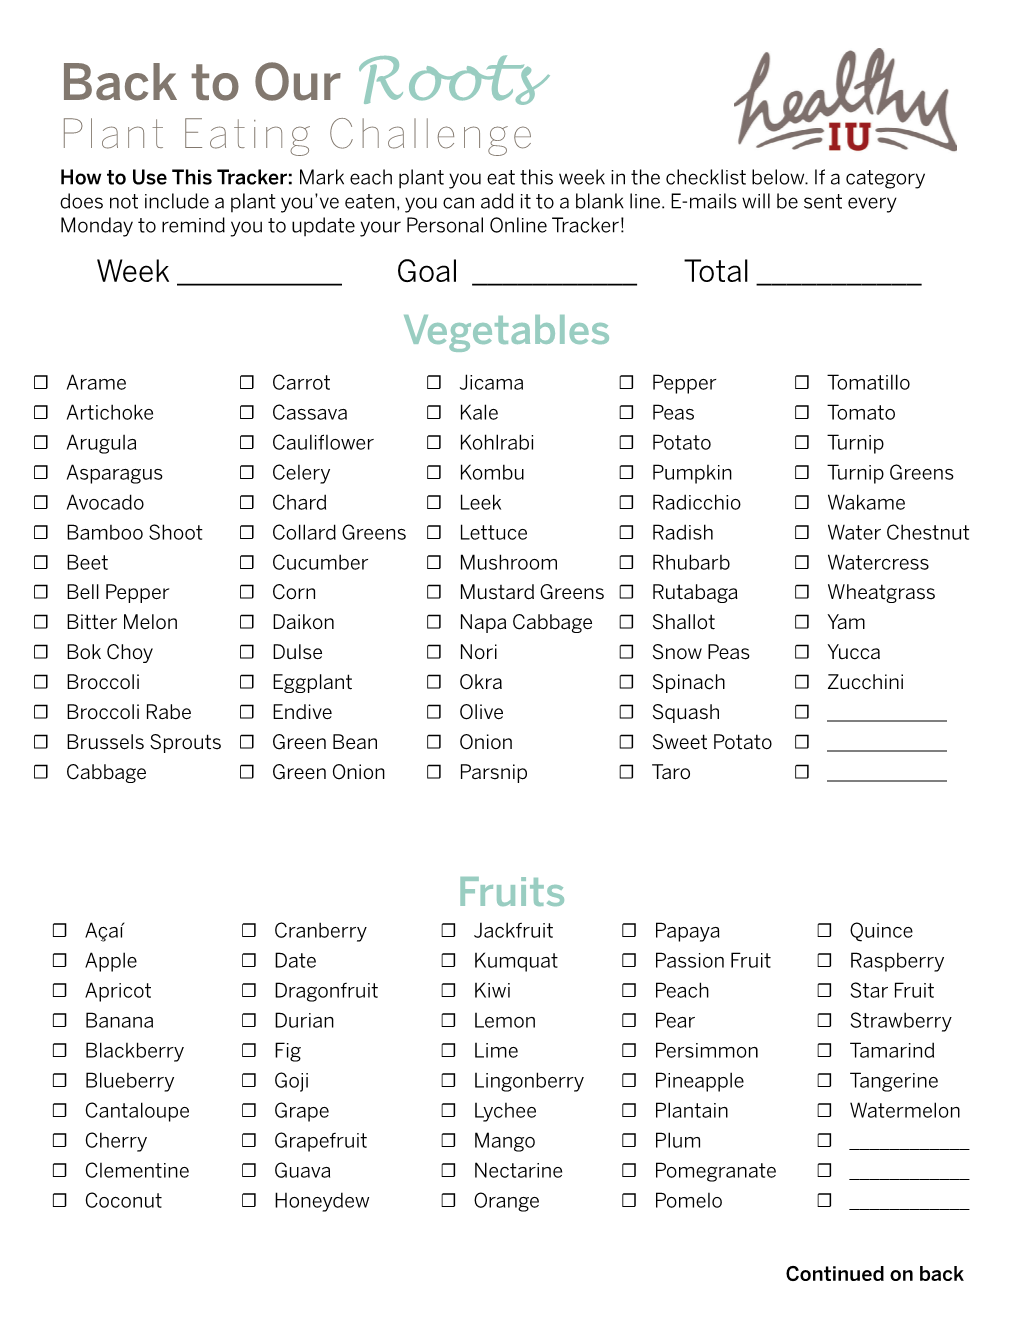 Our Roots Plant Eating Challenge How to Use This Tracker: Mark Each Plant You Eat This Week in the Checklist Below